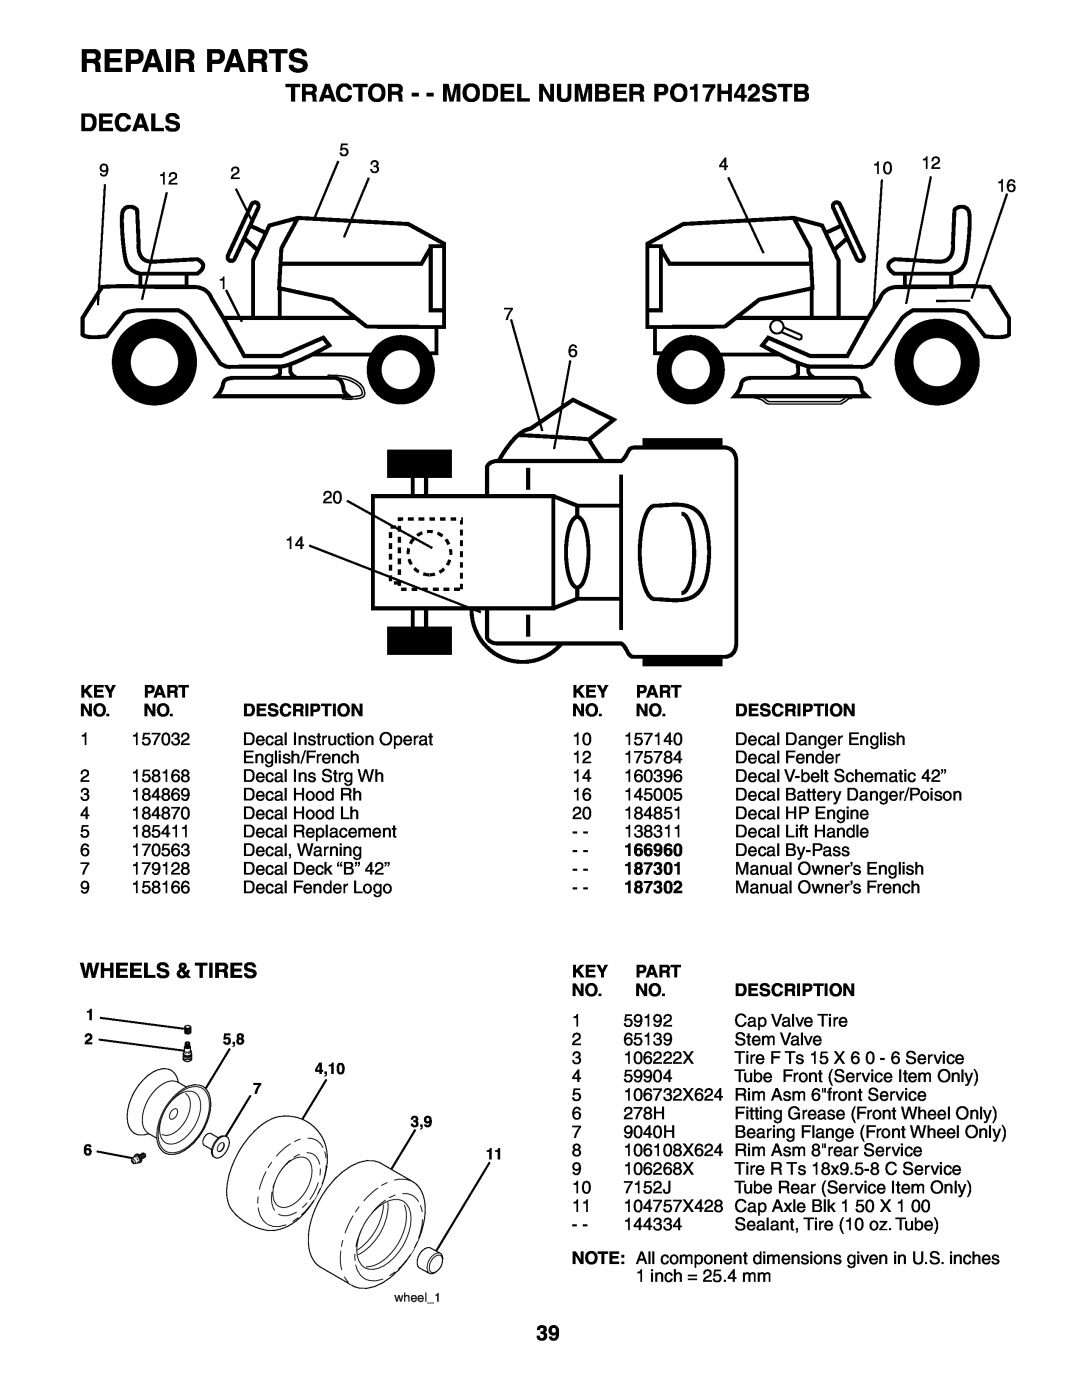 Poulan 187301 manual TRACTOR - - MODEL NUMBER PO17H42STB DECALS, Wheels & Tires, Repair Parts 